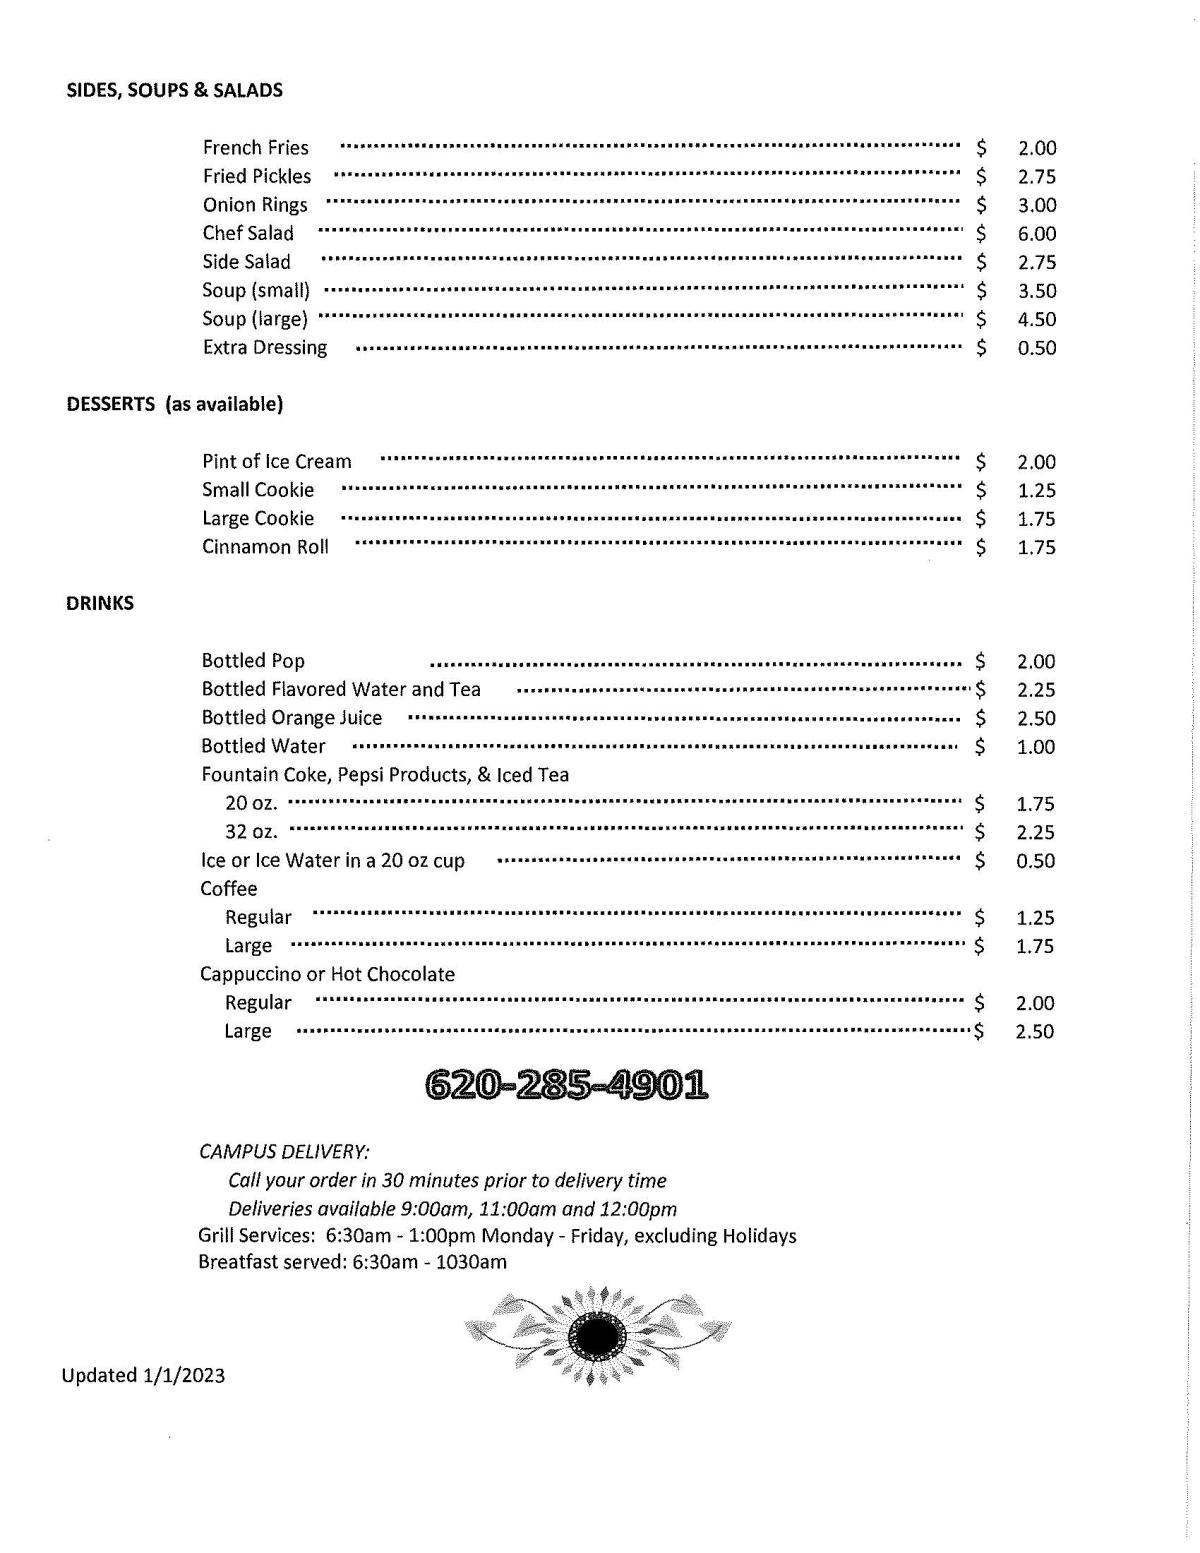 Sunflower Grill Daily Menu Page 2. See the attached PDF for a readable copy.